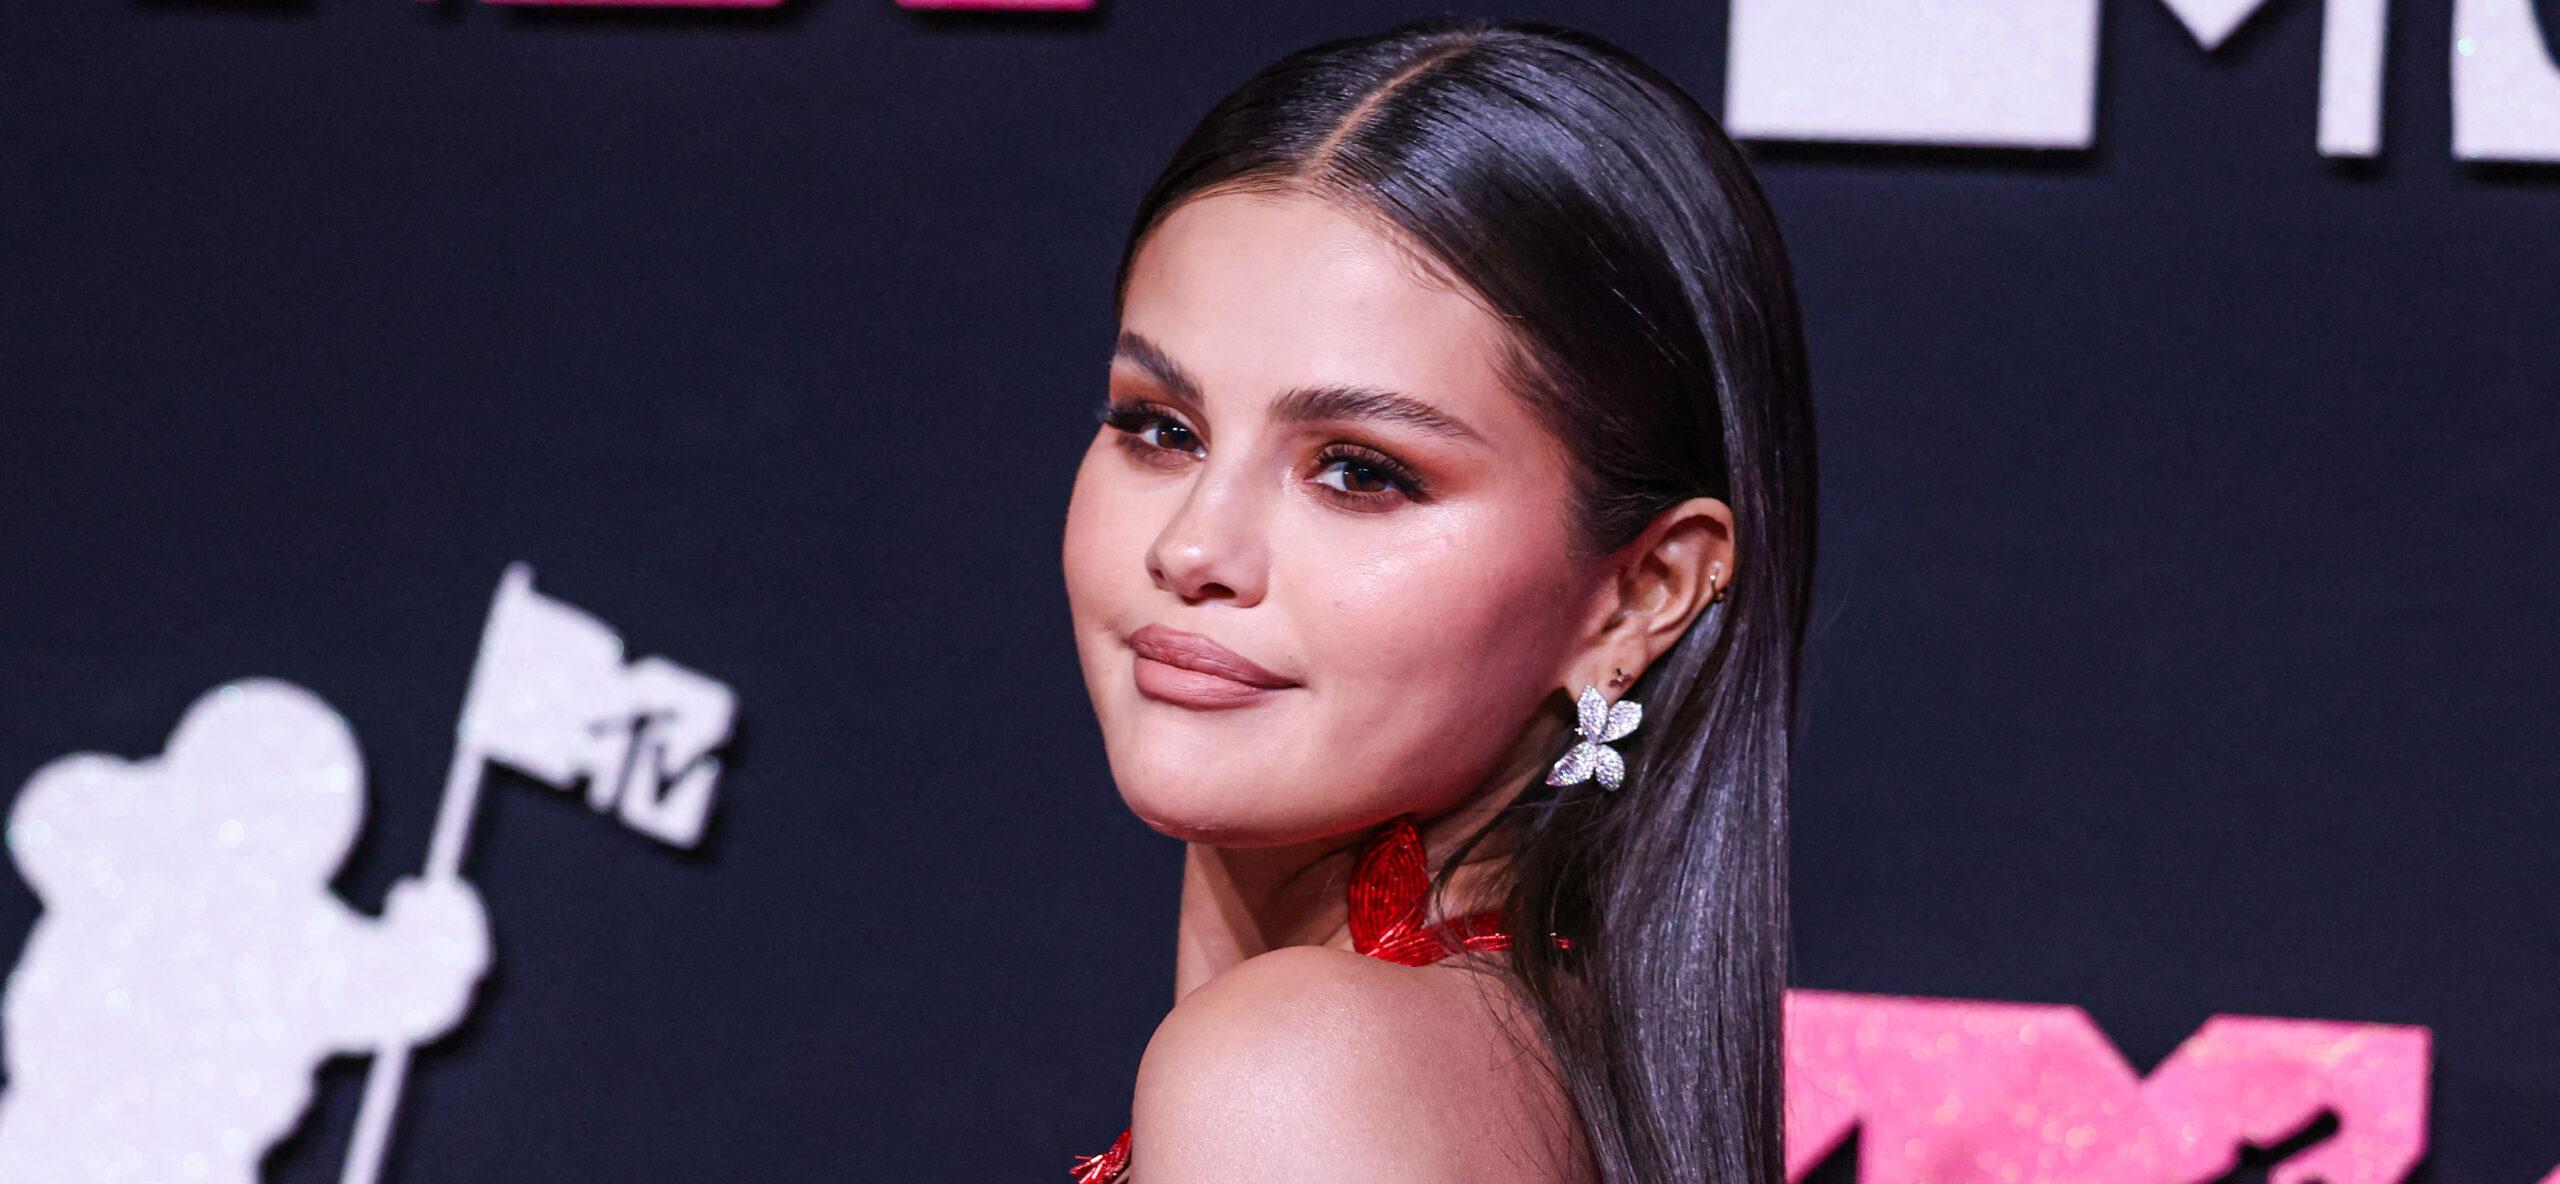 Selena Gomez Says Quitting Instagram For Four Years ‘Felt Like The Most Rewarding Gift’